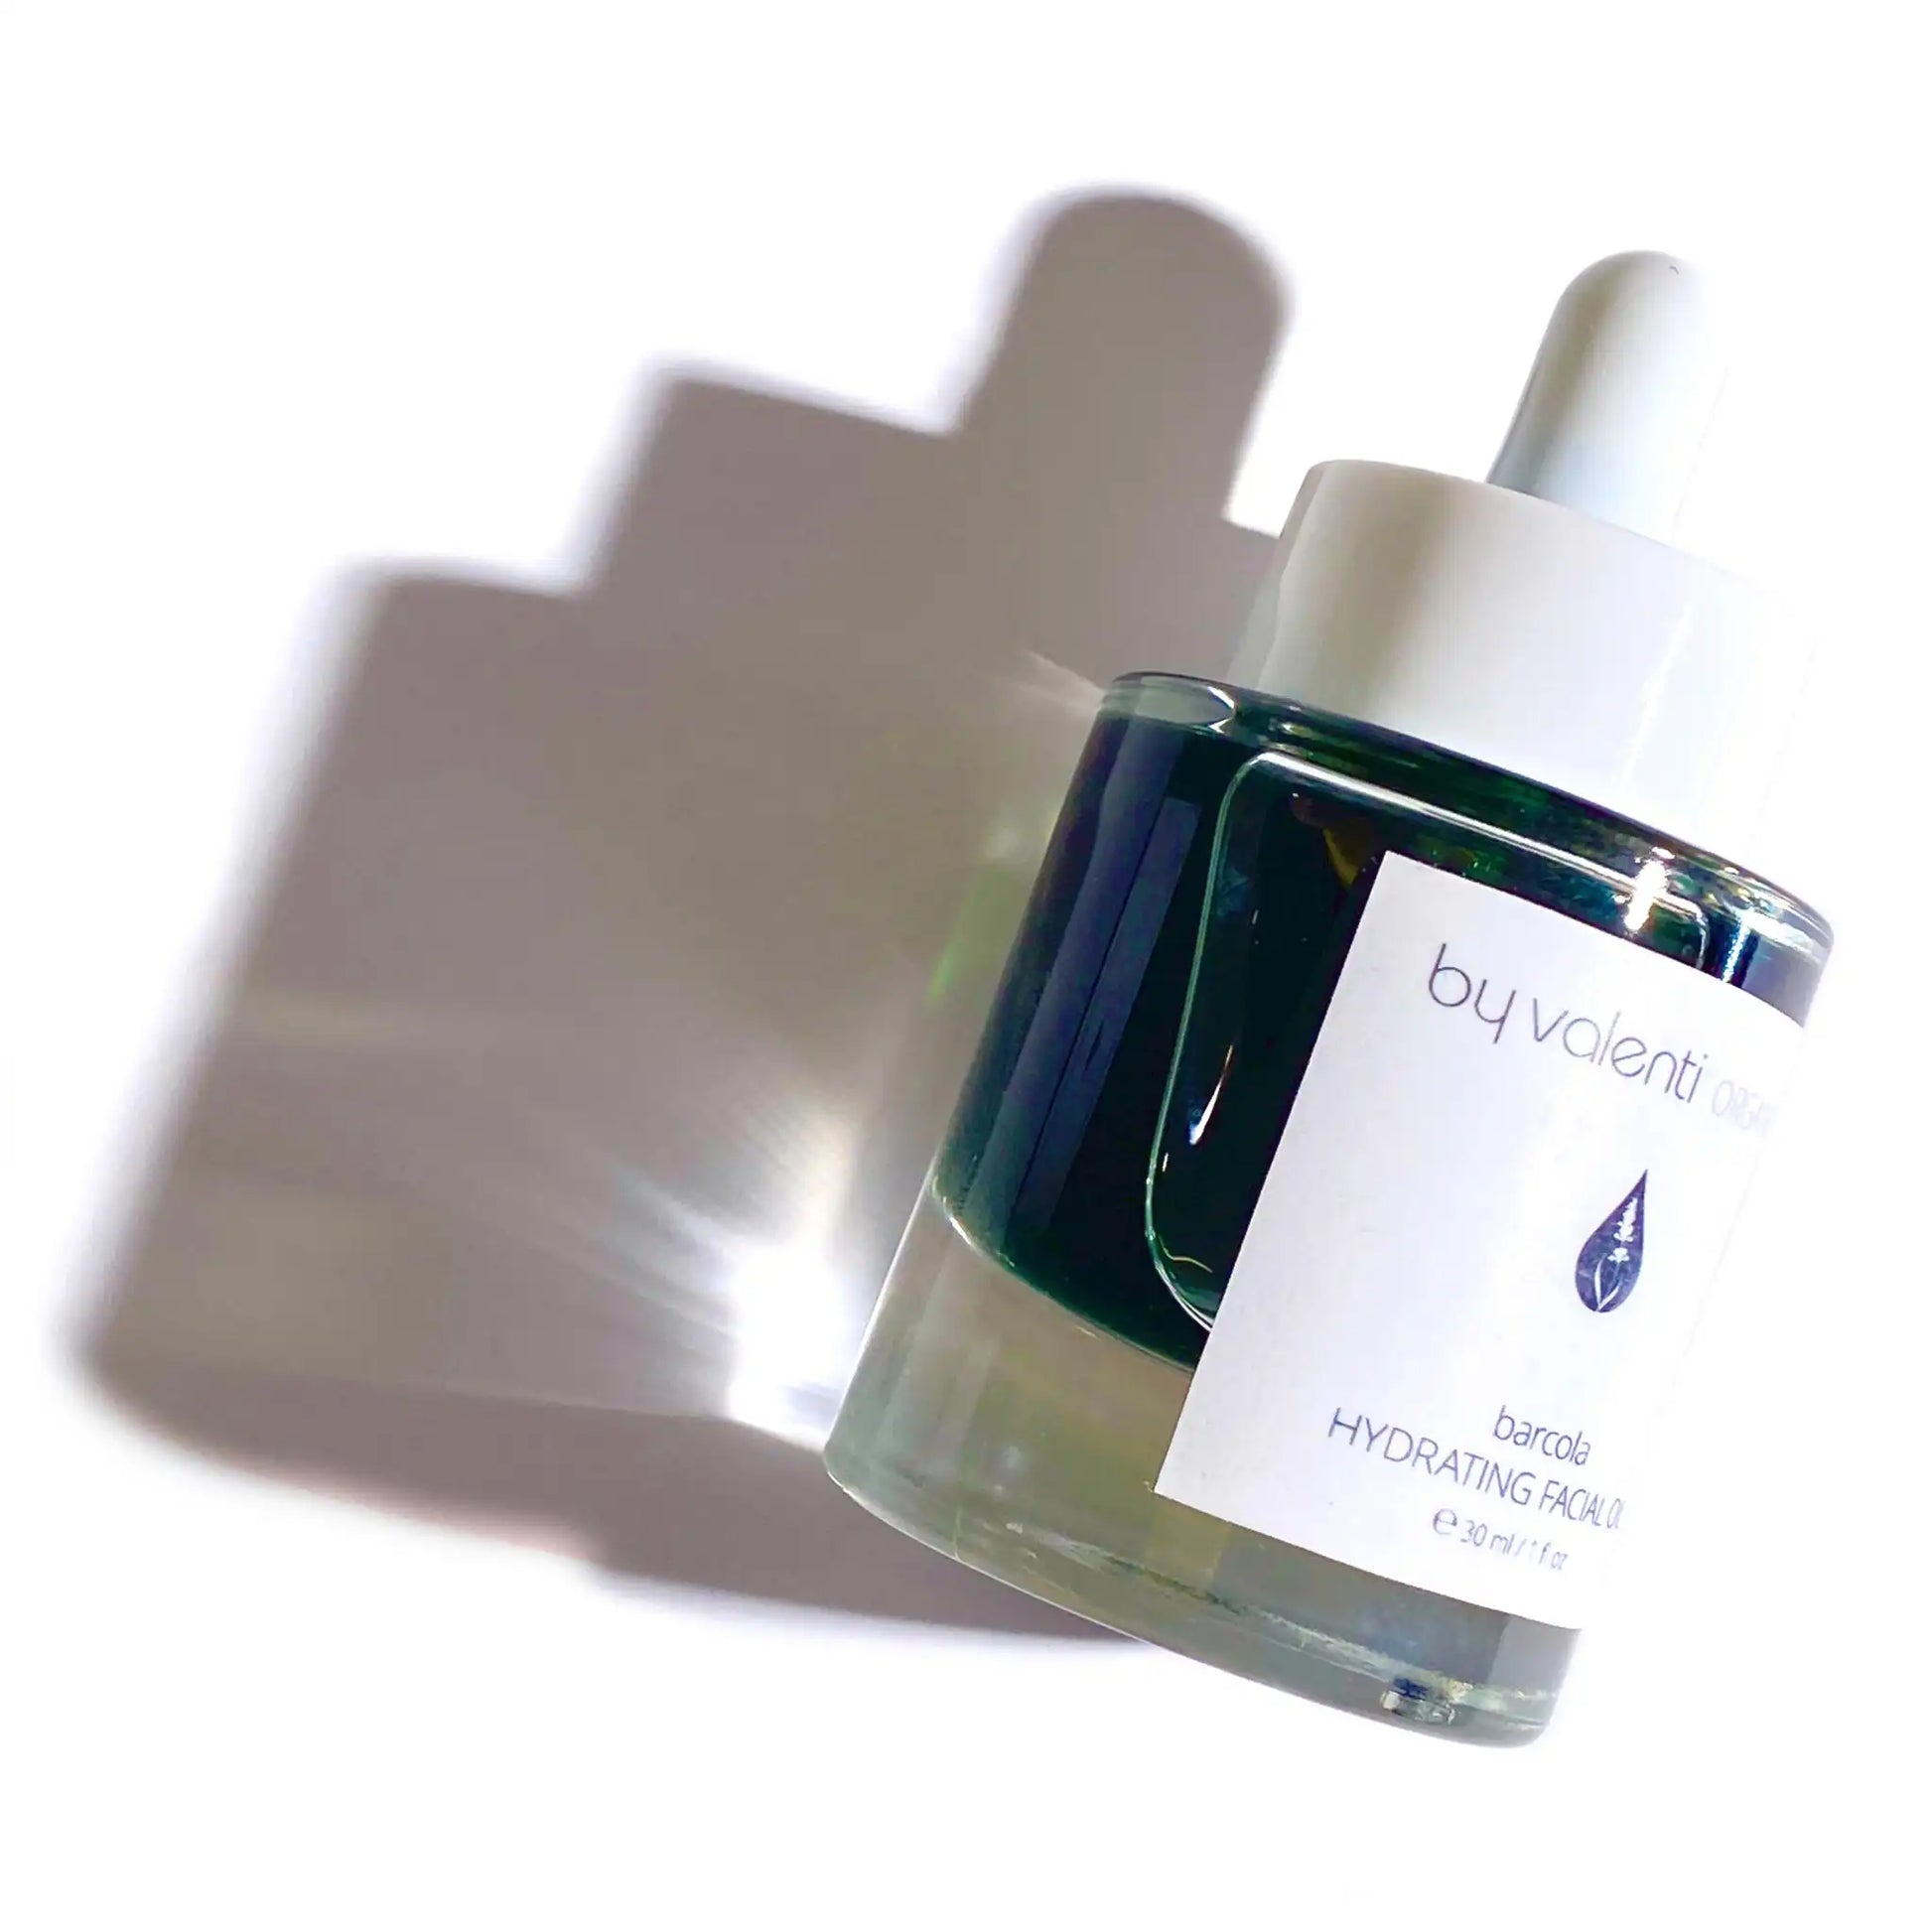 Barcola Hydrating Oil with Blue Tansy Essential Oil By Valenti Organics Natural Cruelty Free Skin Care